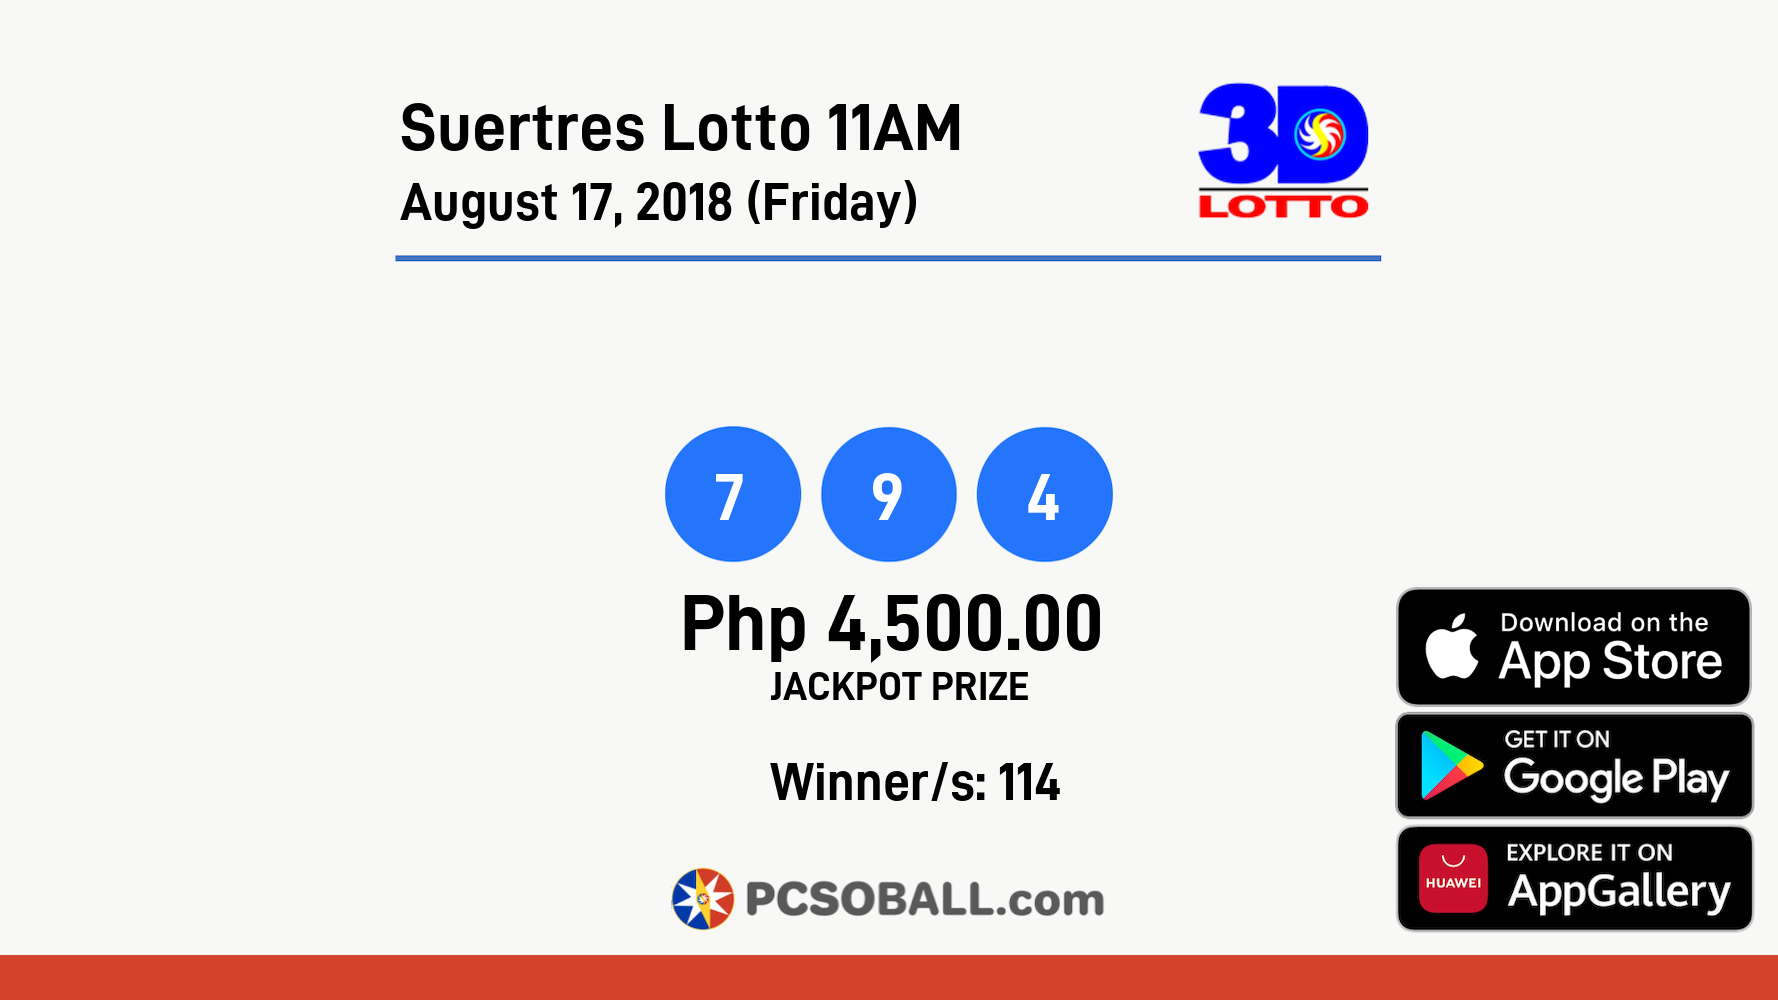 Suertres Lotto 11AM August 17, 2018 (Friday) Result